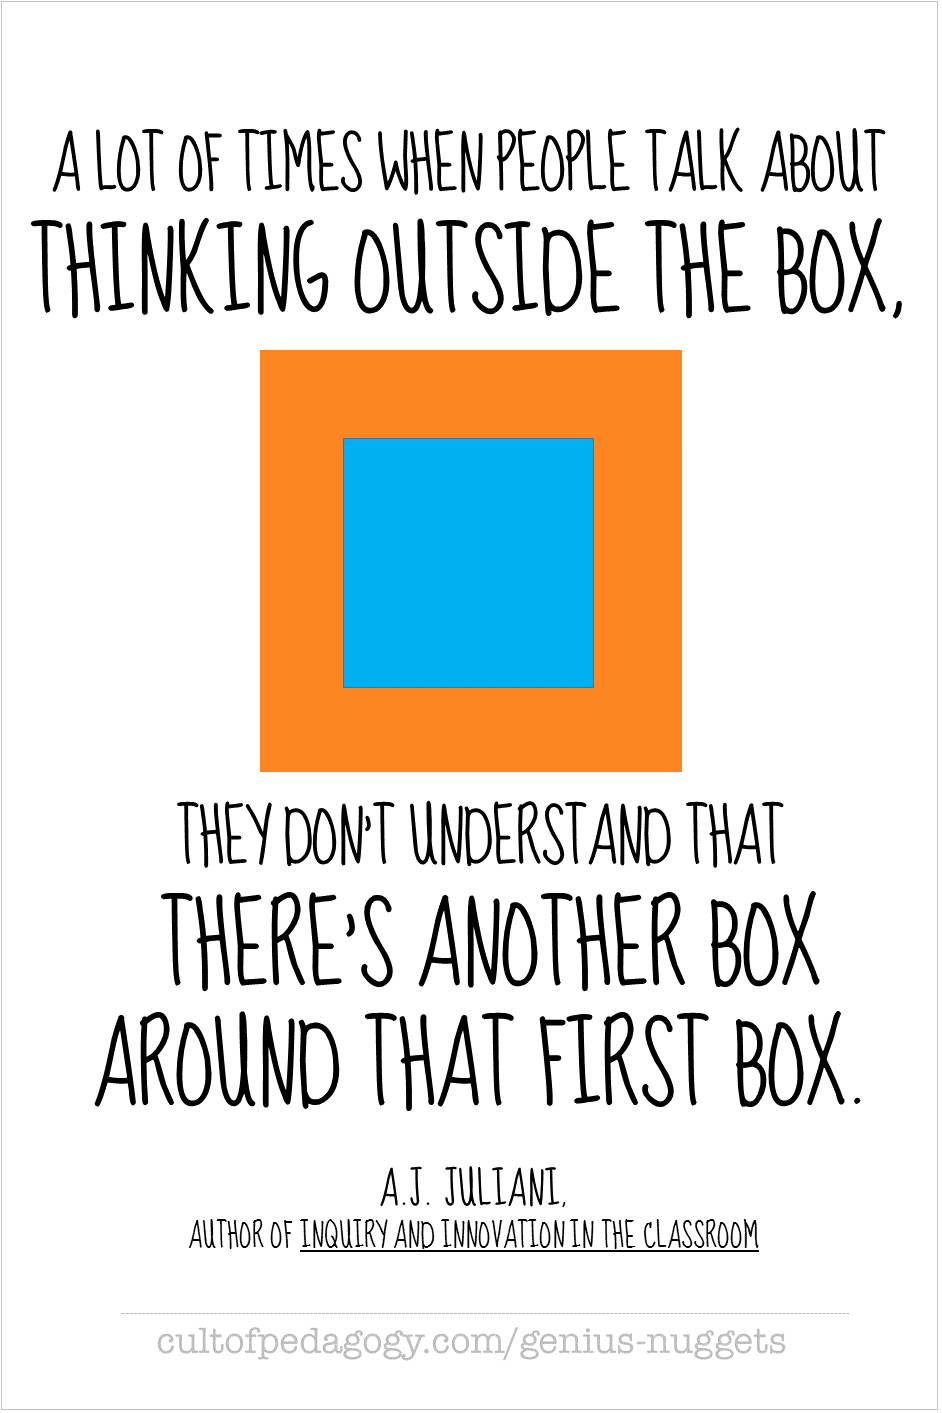 Quote by A.J. Juliani: "A lot of times when people talk about thinking outside the box..."